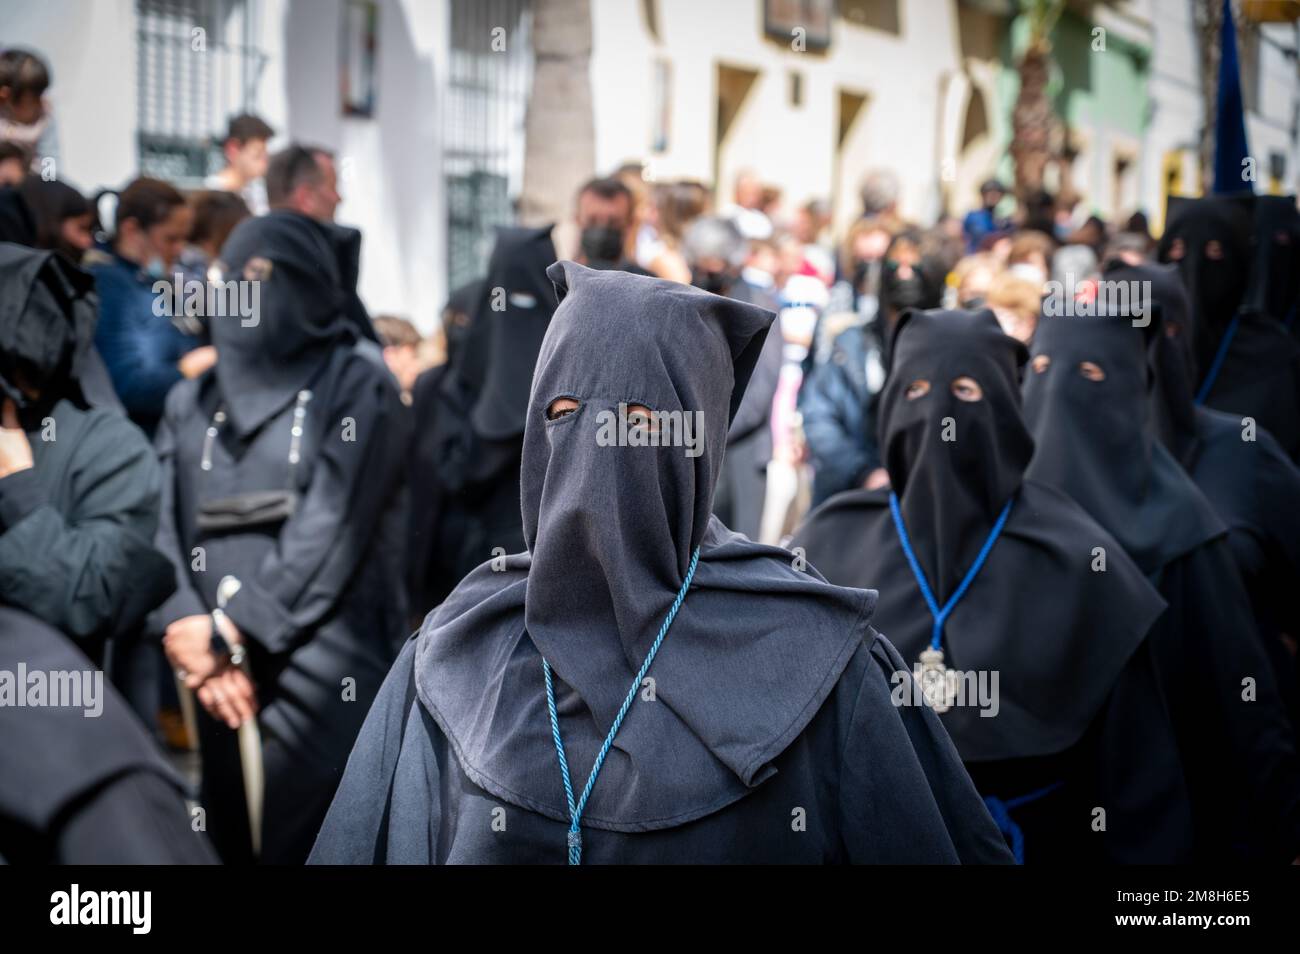 People wearing black clothing and chains walking barefoot in a traditional Easter parade at Holy week or semana santa in Cadiz Spain Stock Photo